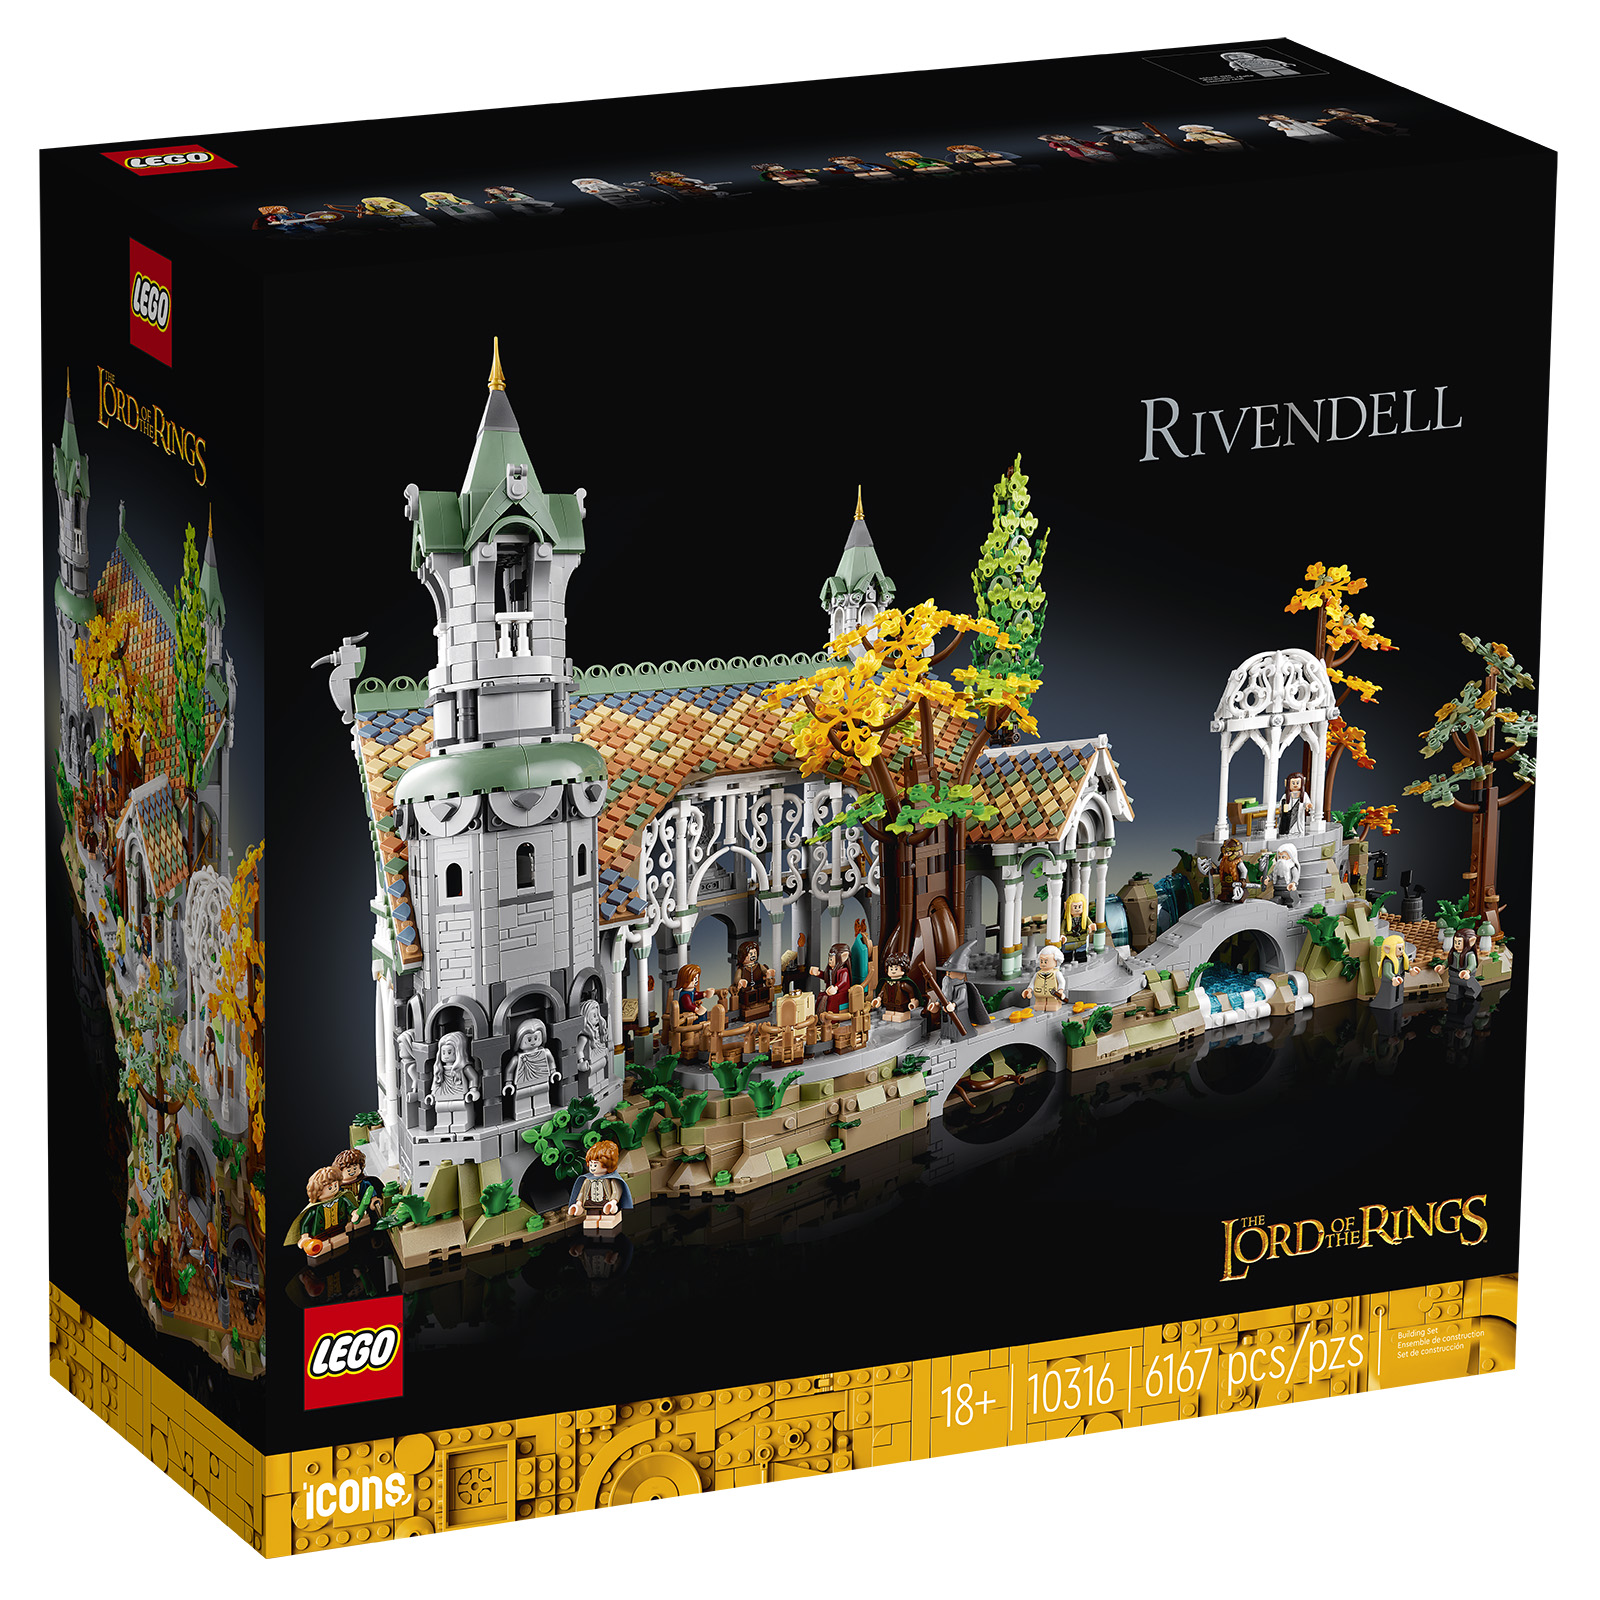 [LEGO] THE LORD OF THE RING / THE HOBBIT seigneur anneaux - Page 7 Lego-icons-10316-lord-rings-rivendell-box-front